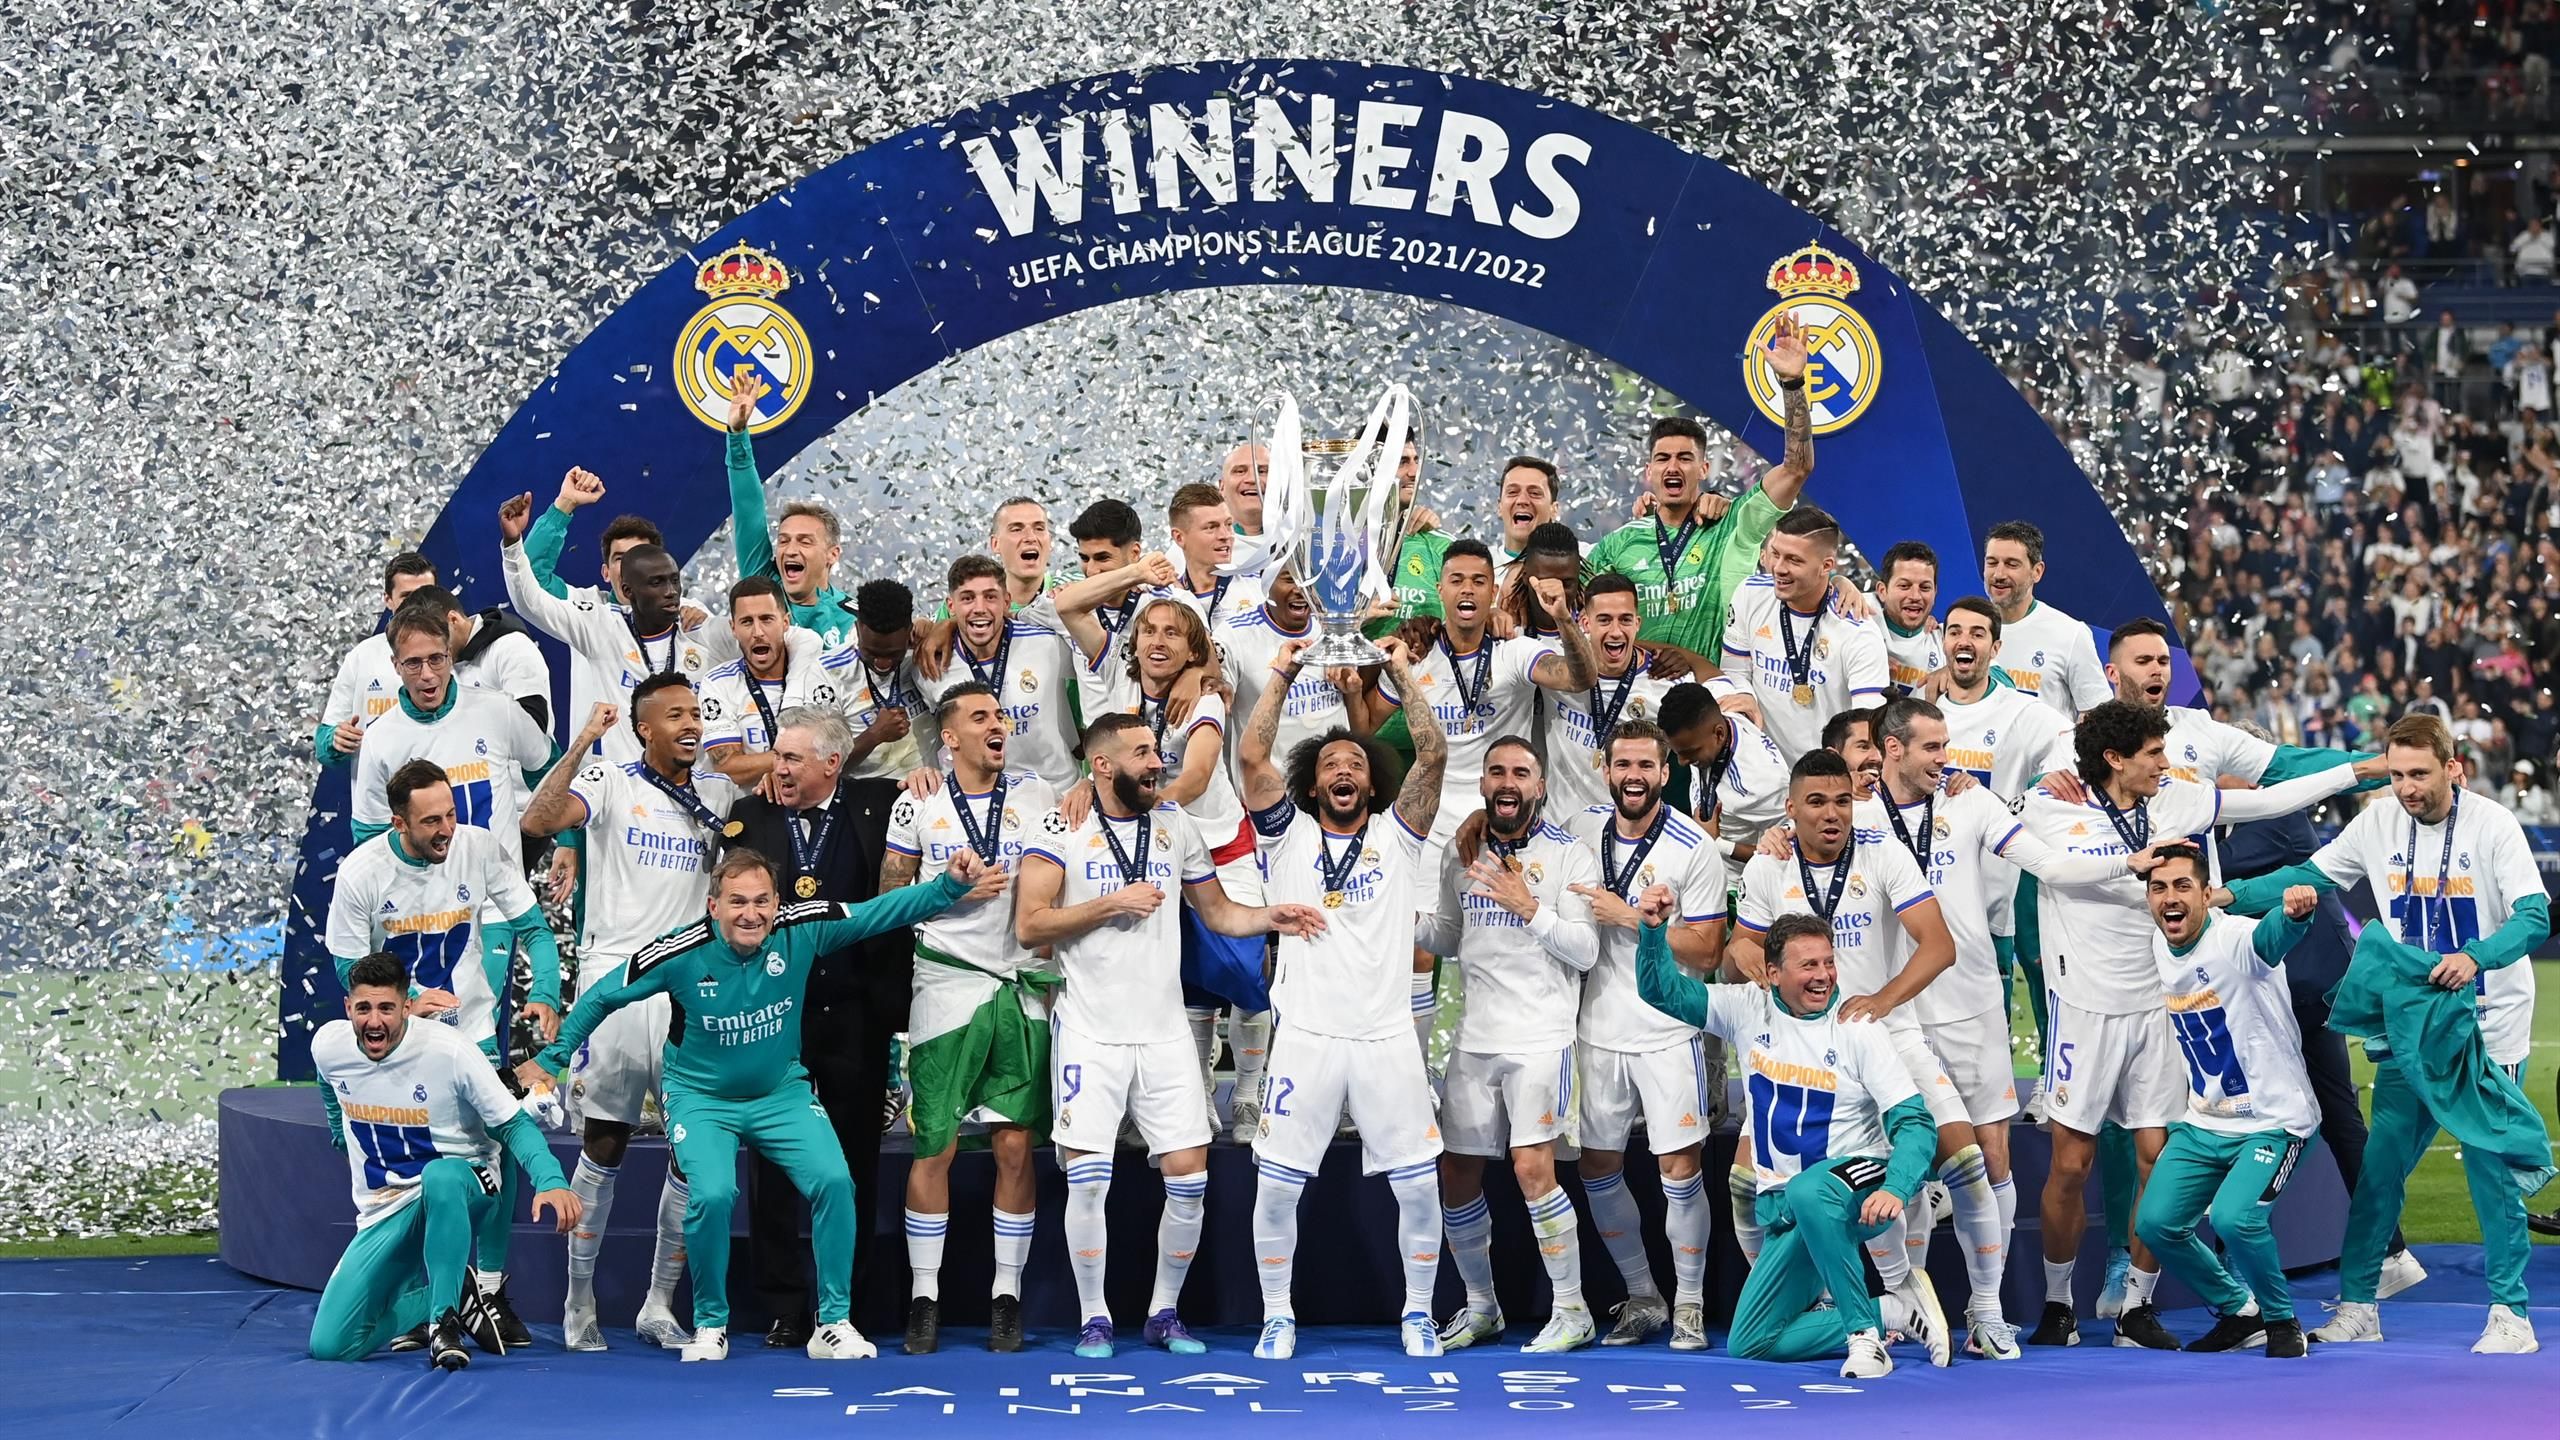 Real Madrid Kings of Europe once more as Thibaut Courtois and Vinicius Jr star and see off Liverpool